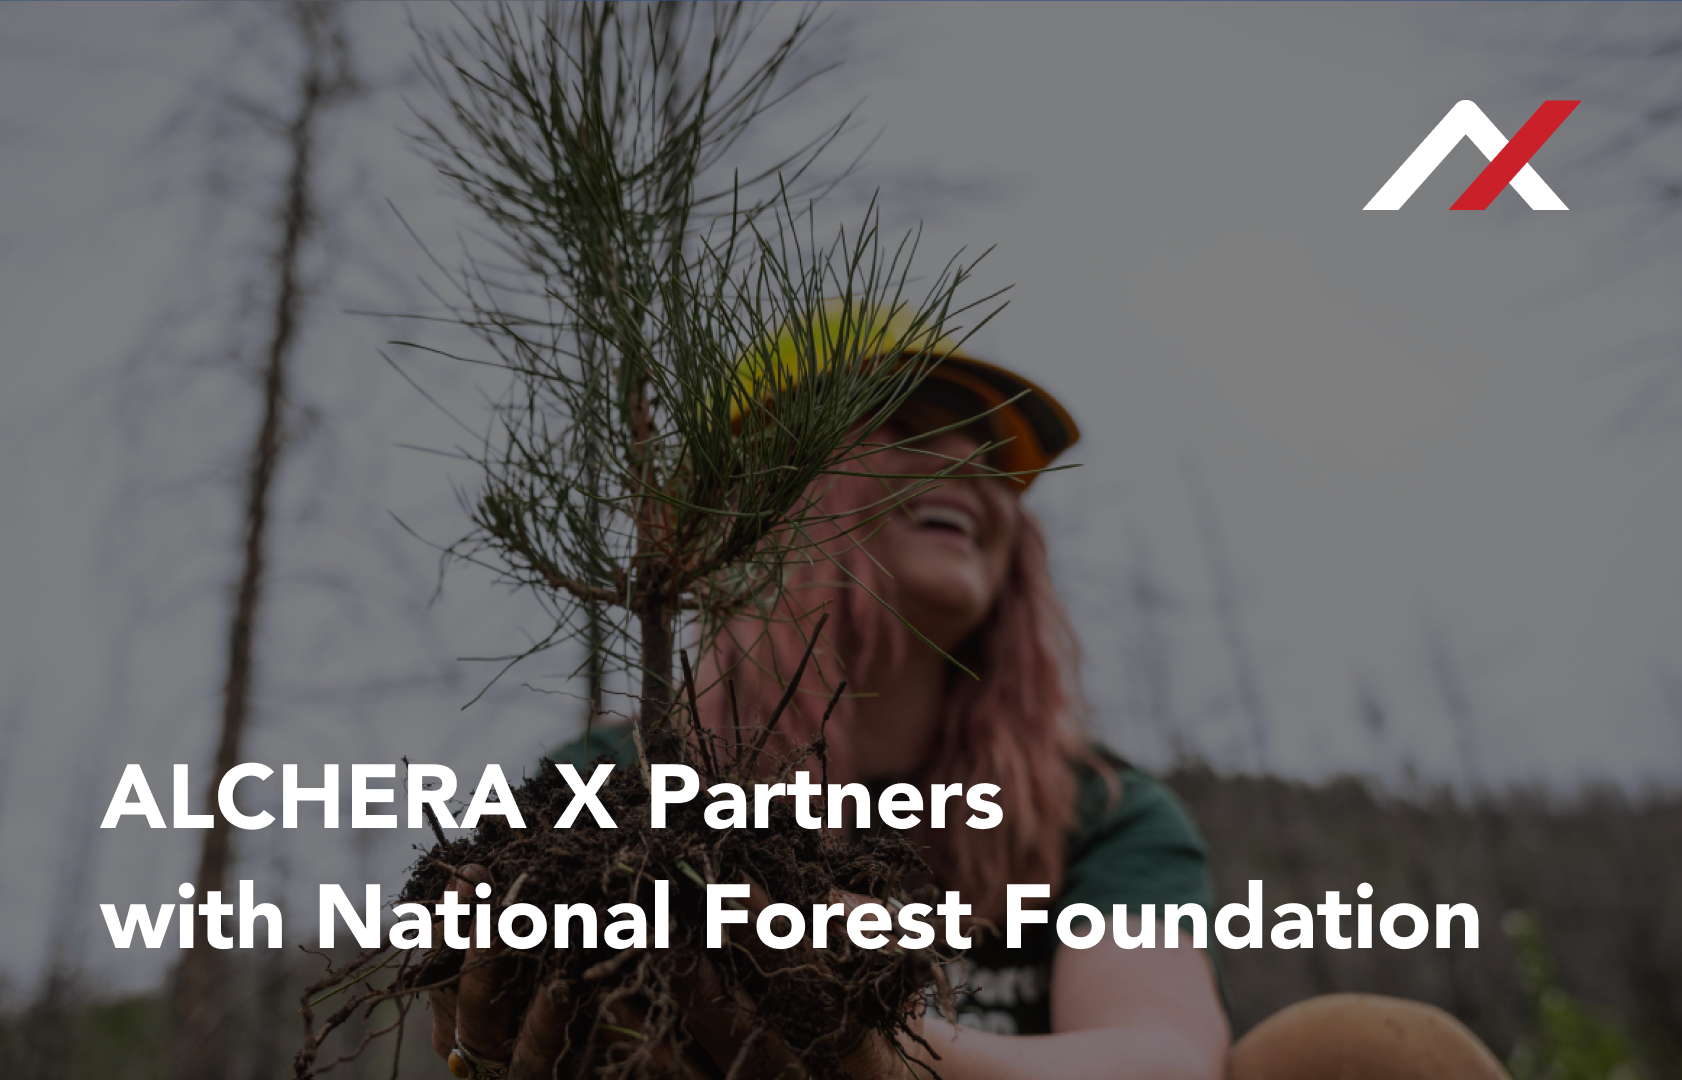 Alchera X Partners with National Forest Foundation (NFF) in Their Commitment to Plant Thousands of Trees